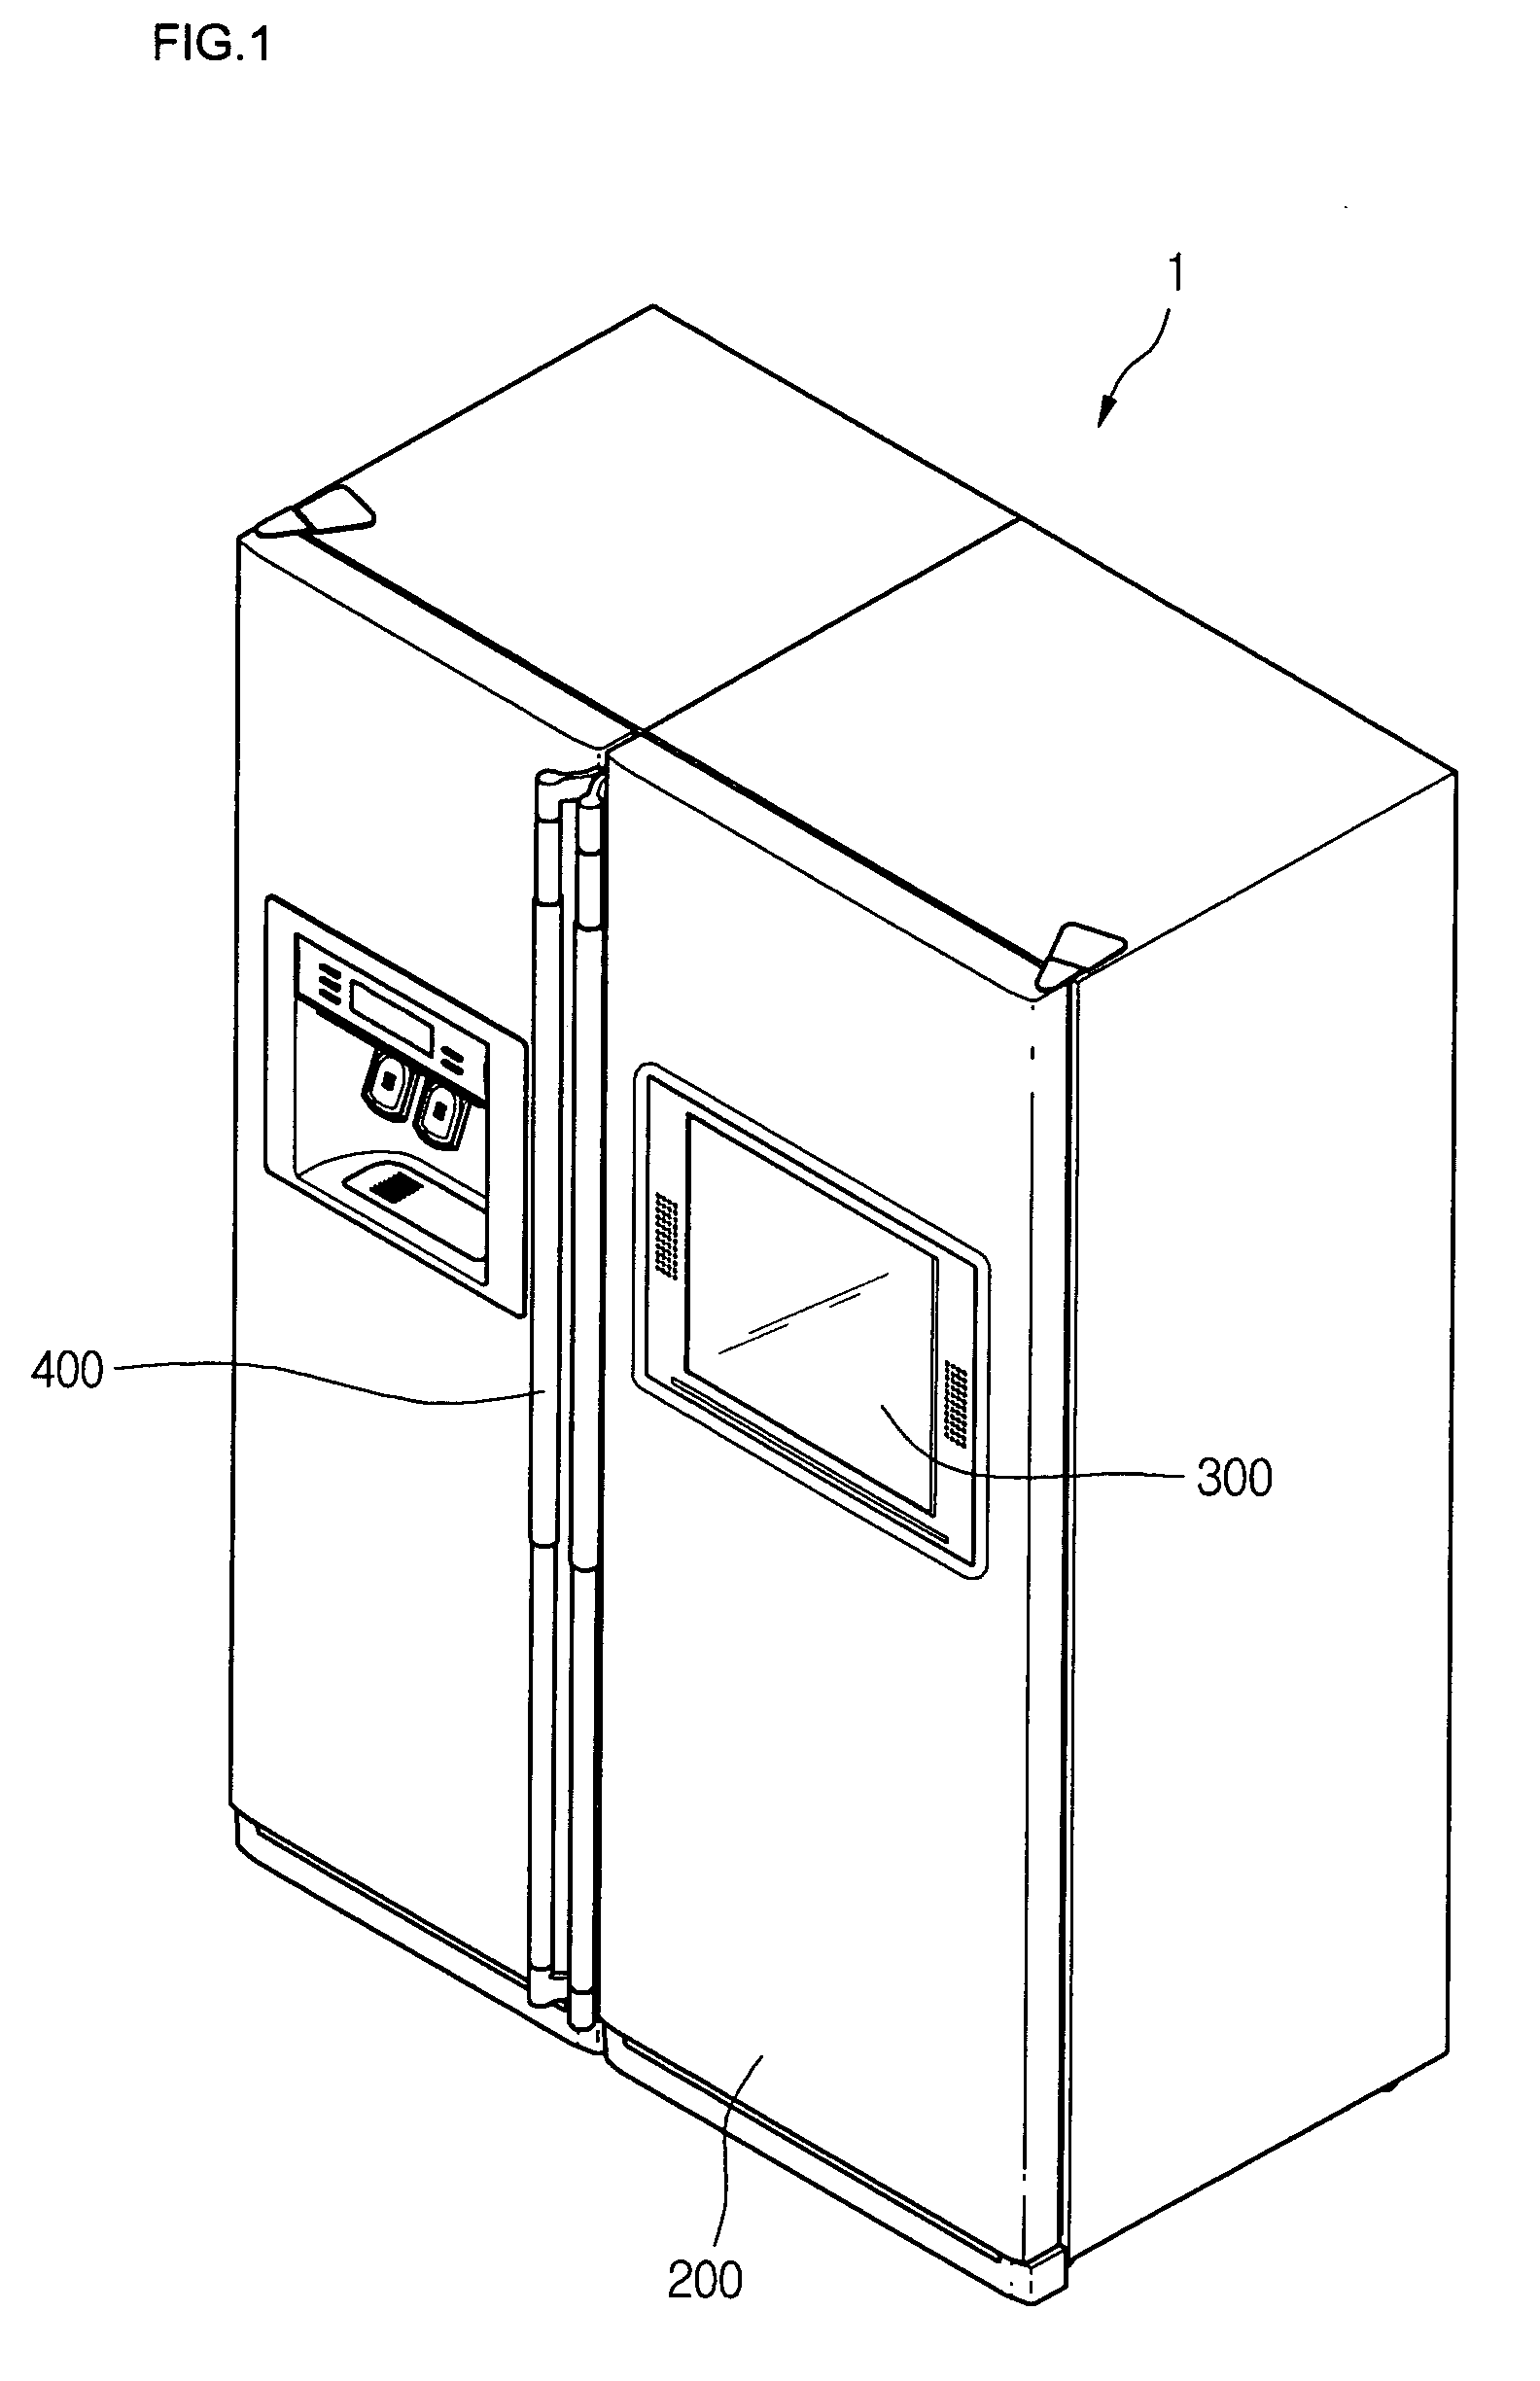 Refrigerator and guide apparatus for display of refrigerator